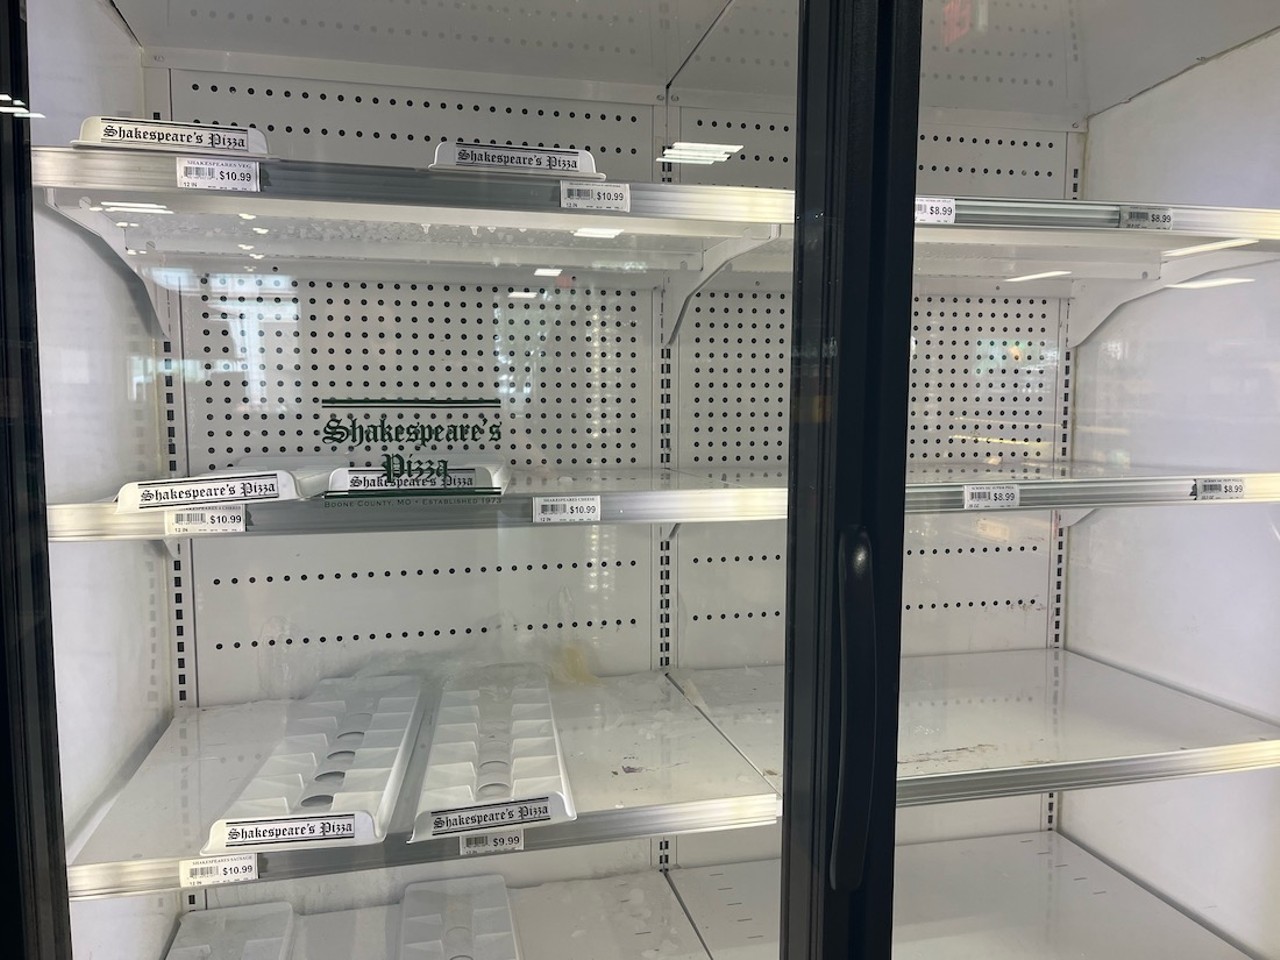 More empty downtown shelves.